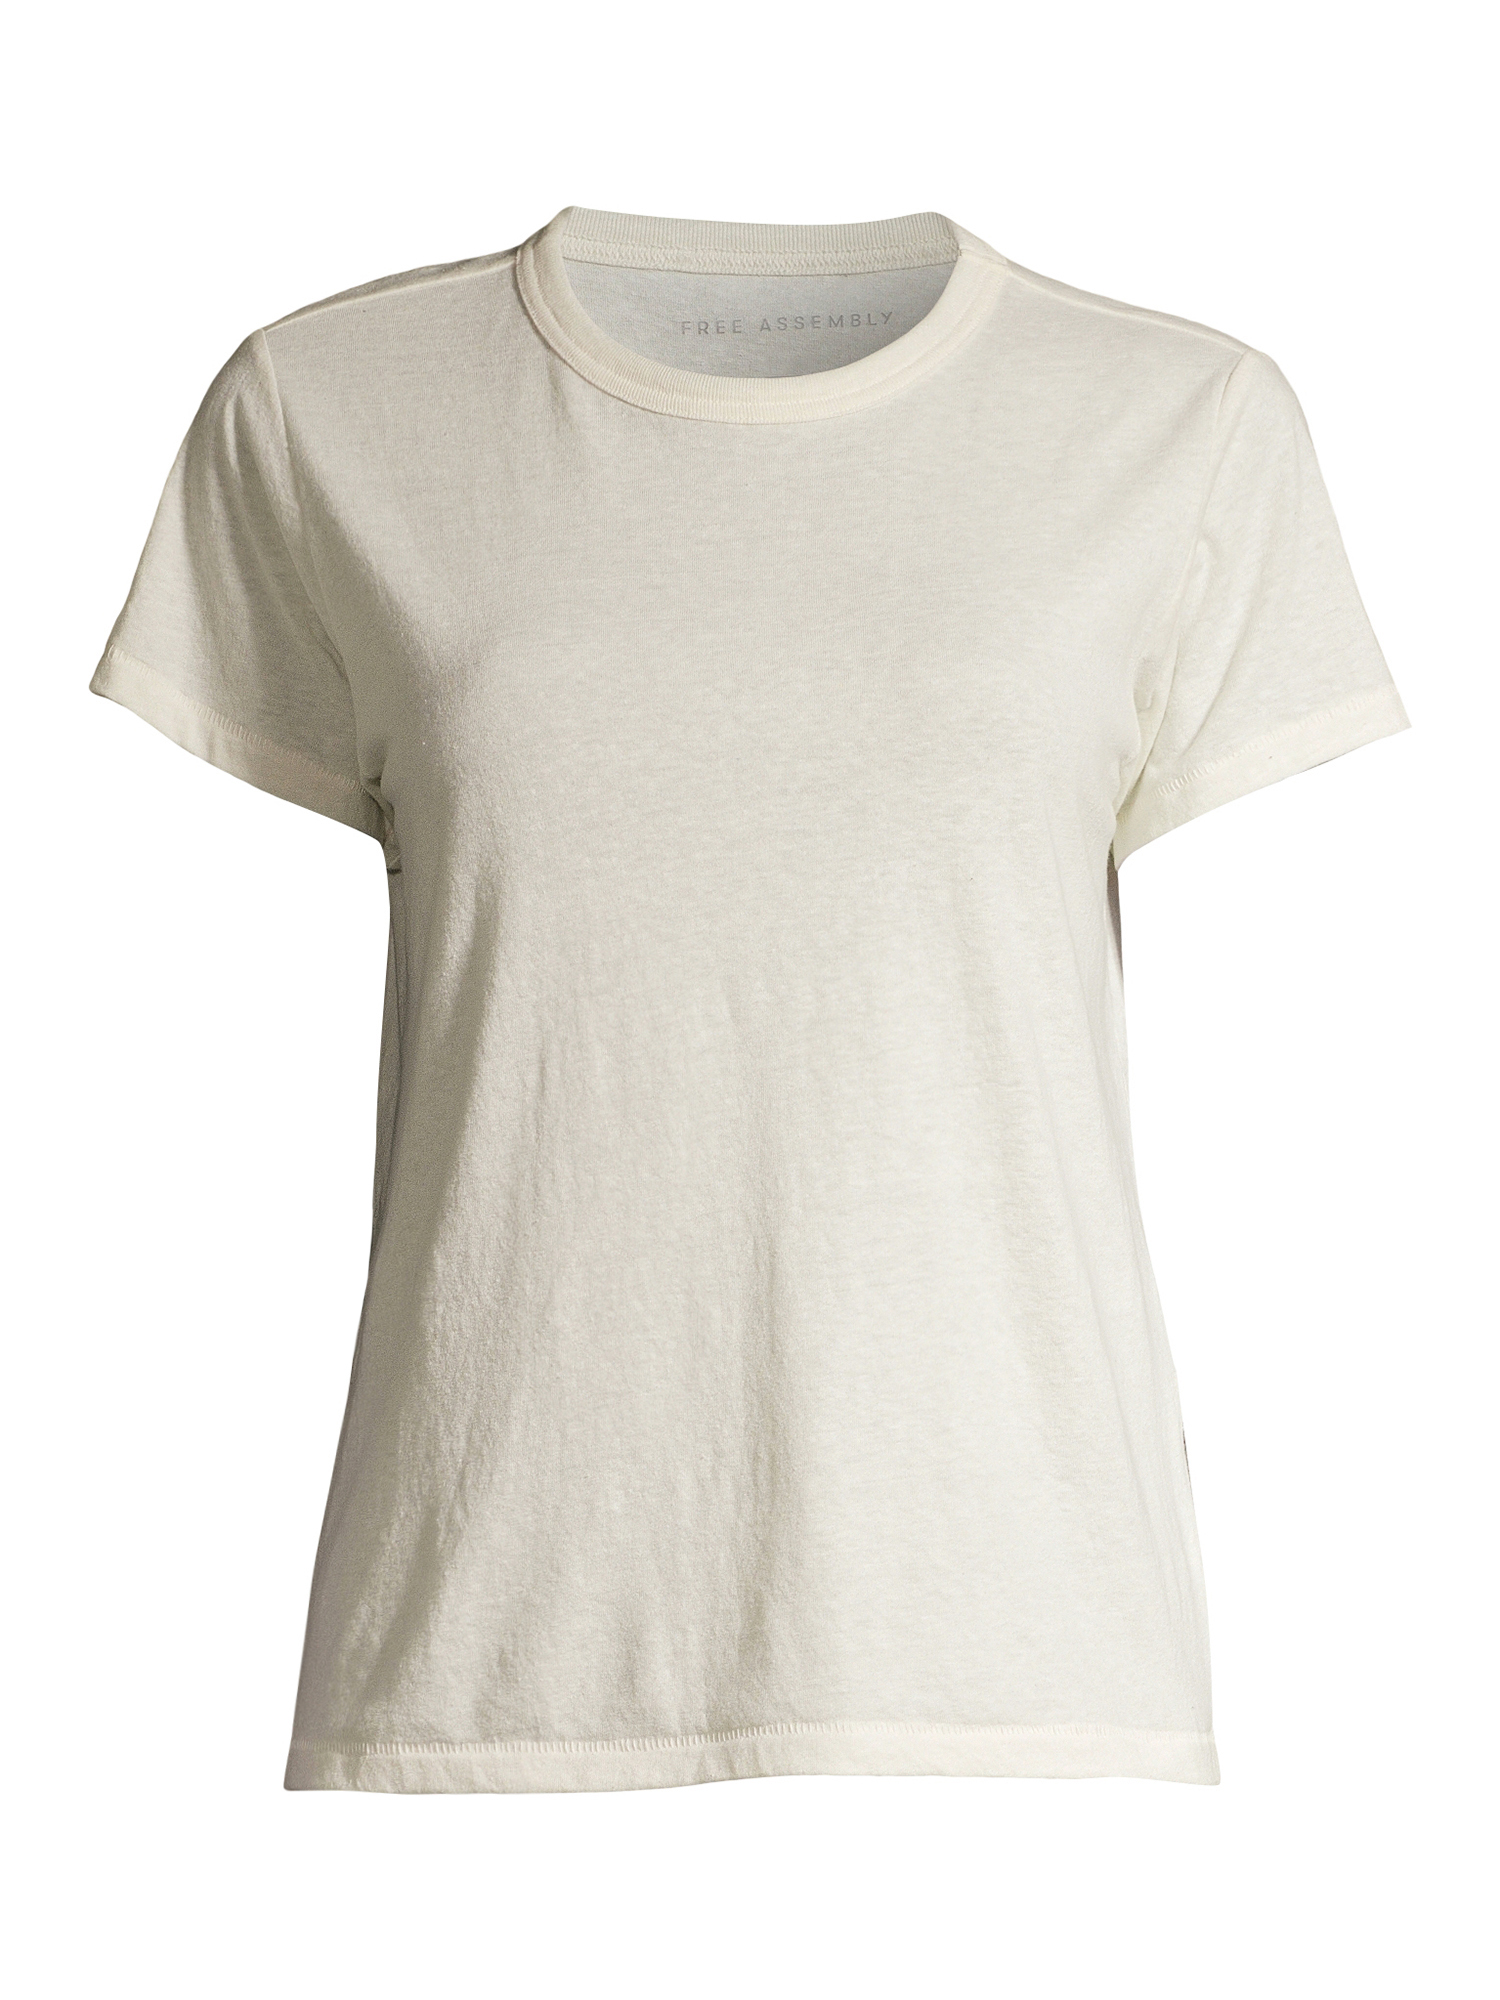 Free Assembly Women's Ringer Tee with Short Sleeves, Sizes XS-XXXL - image 5 of 8